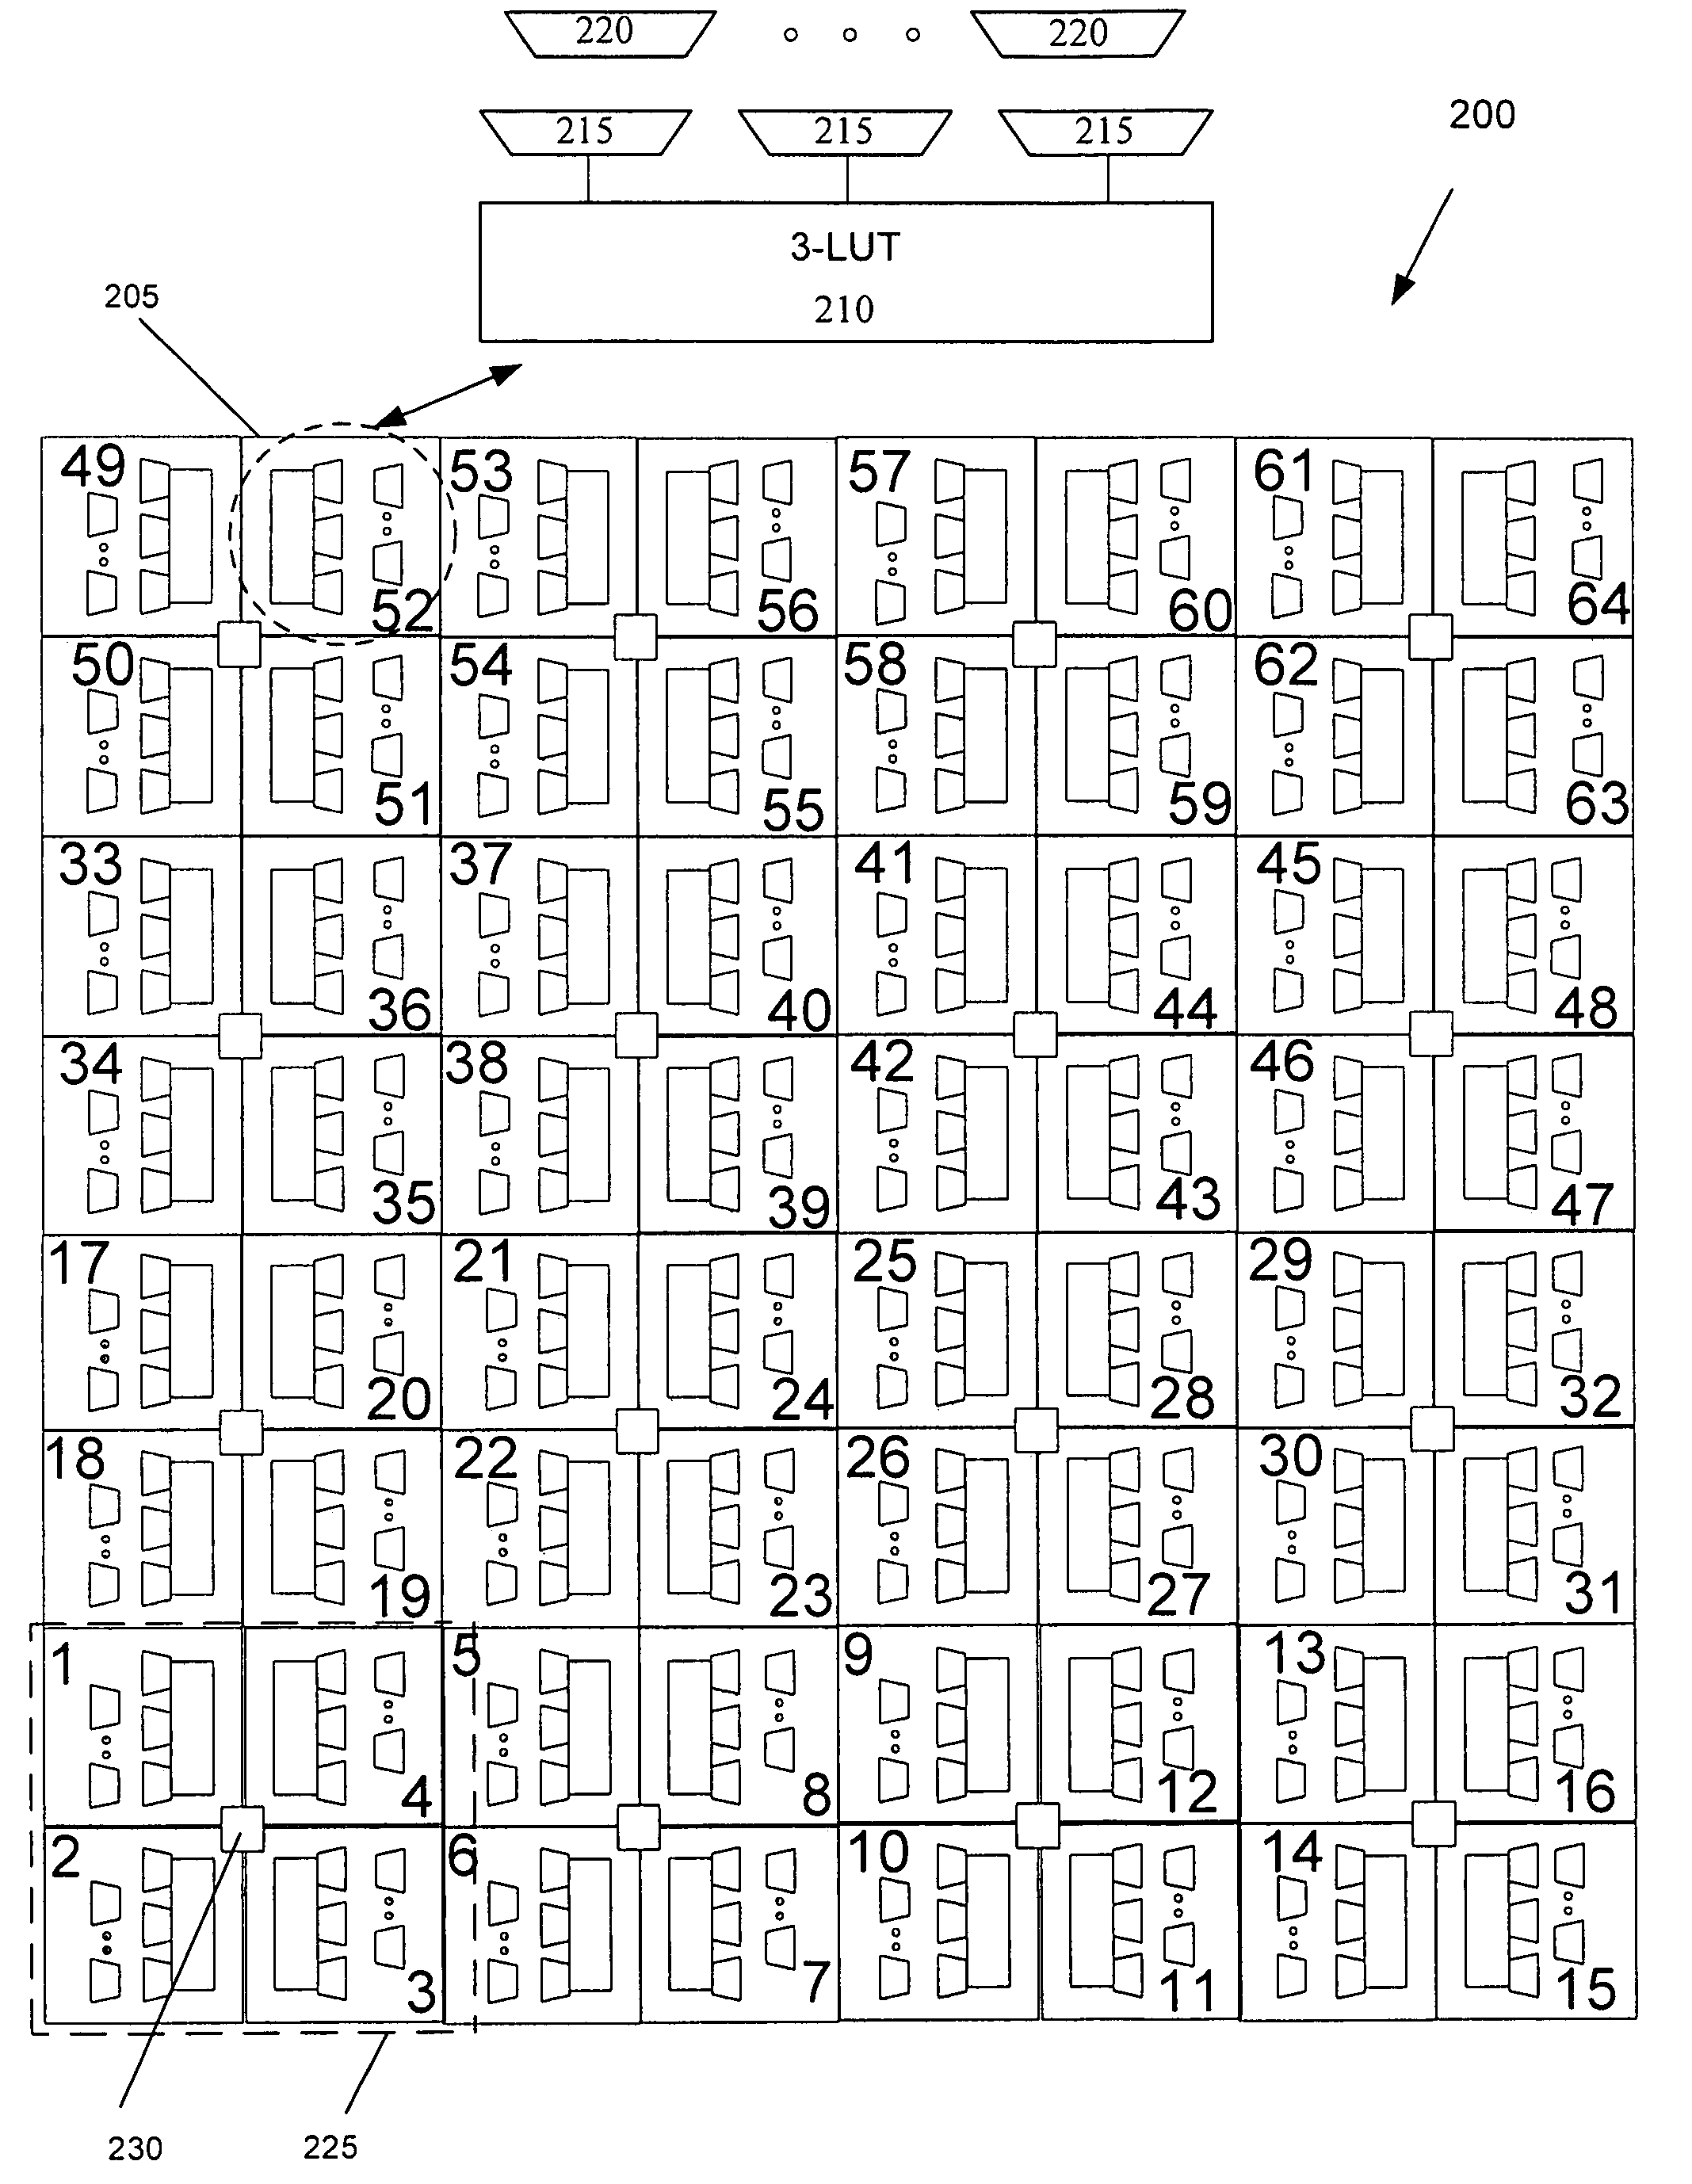 Hybrid interconnect/logic circuits enabling efficient replication of a function in several sub-cycles to save logic and routing resources